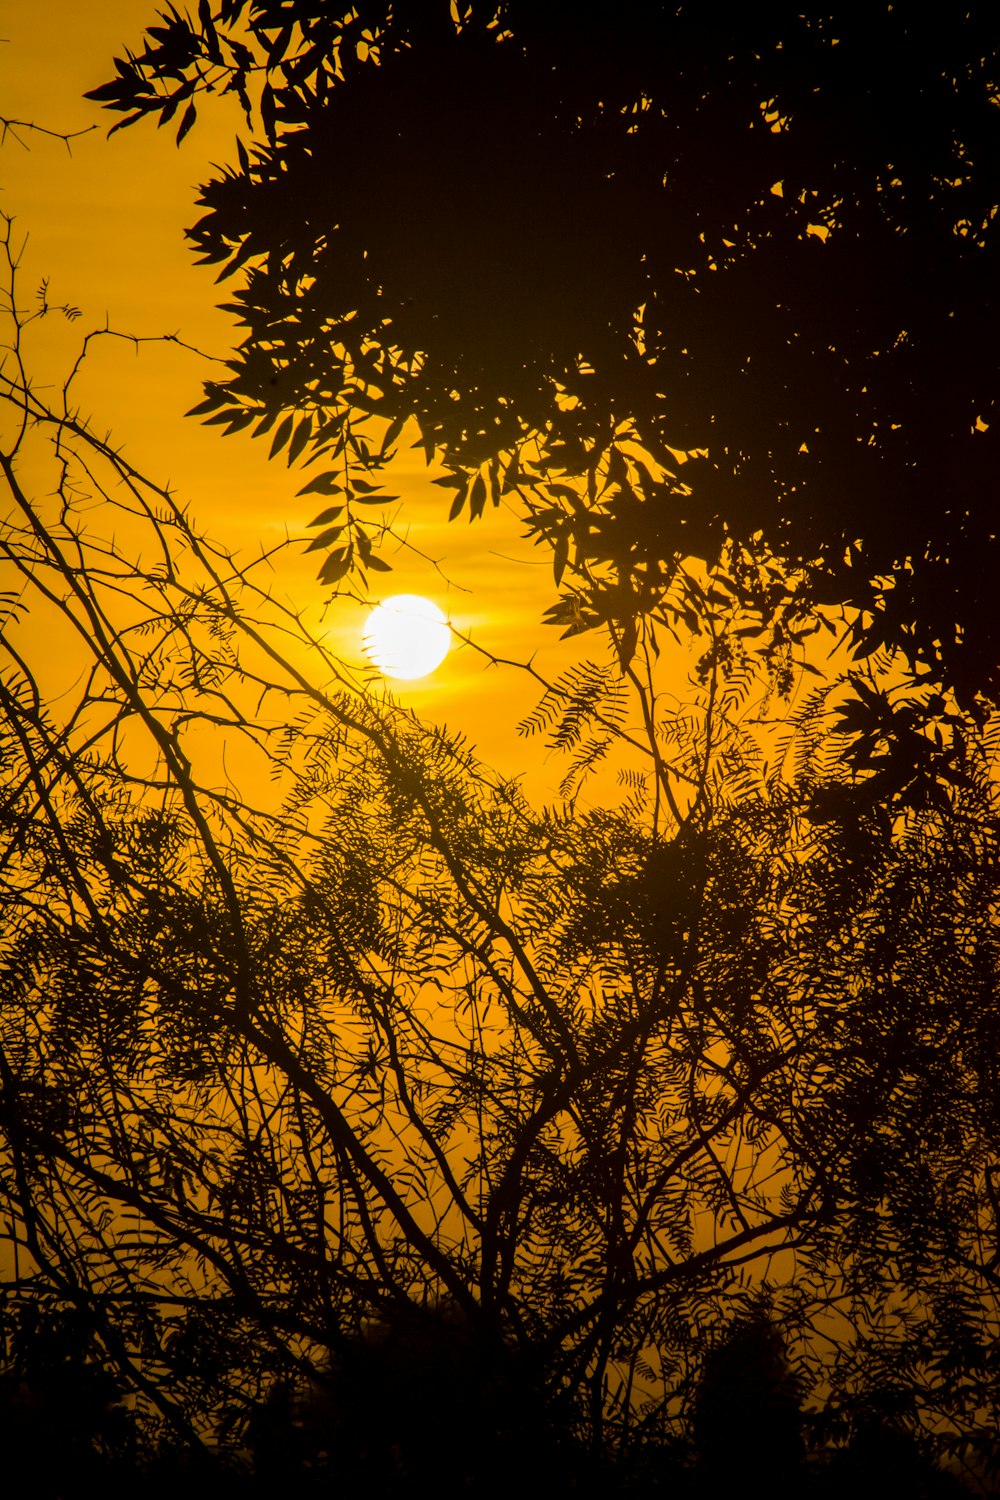 the sun is setting behind the trees